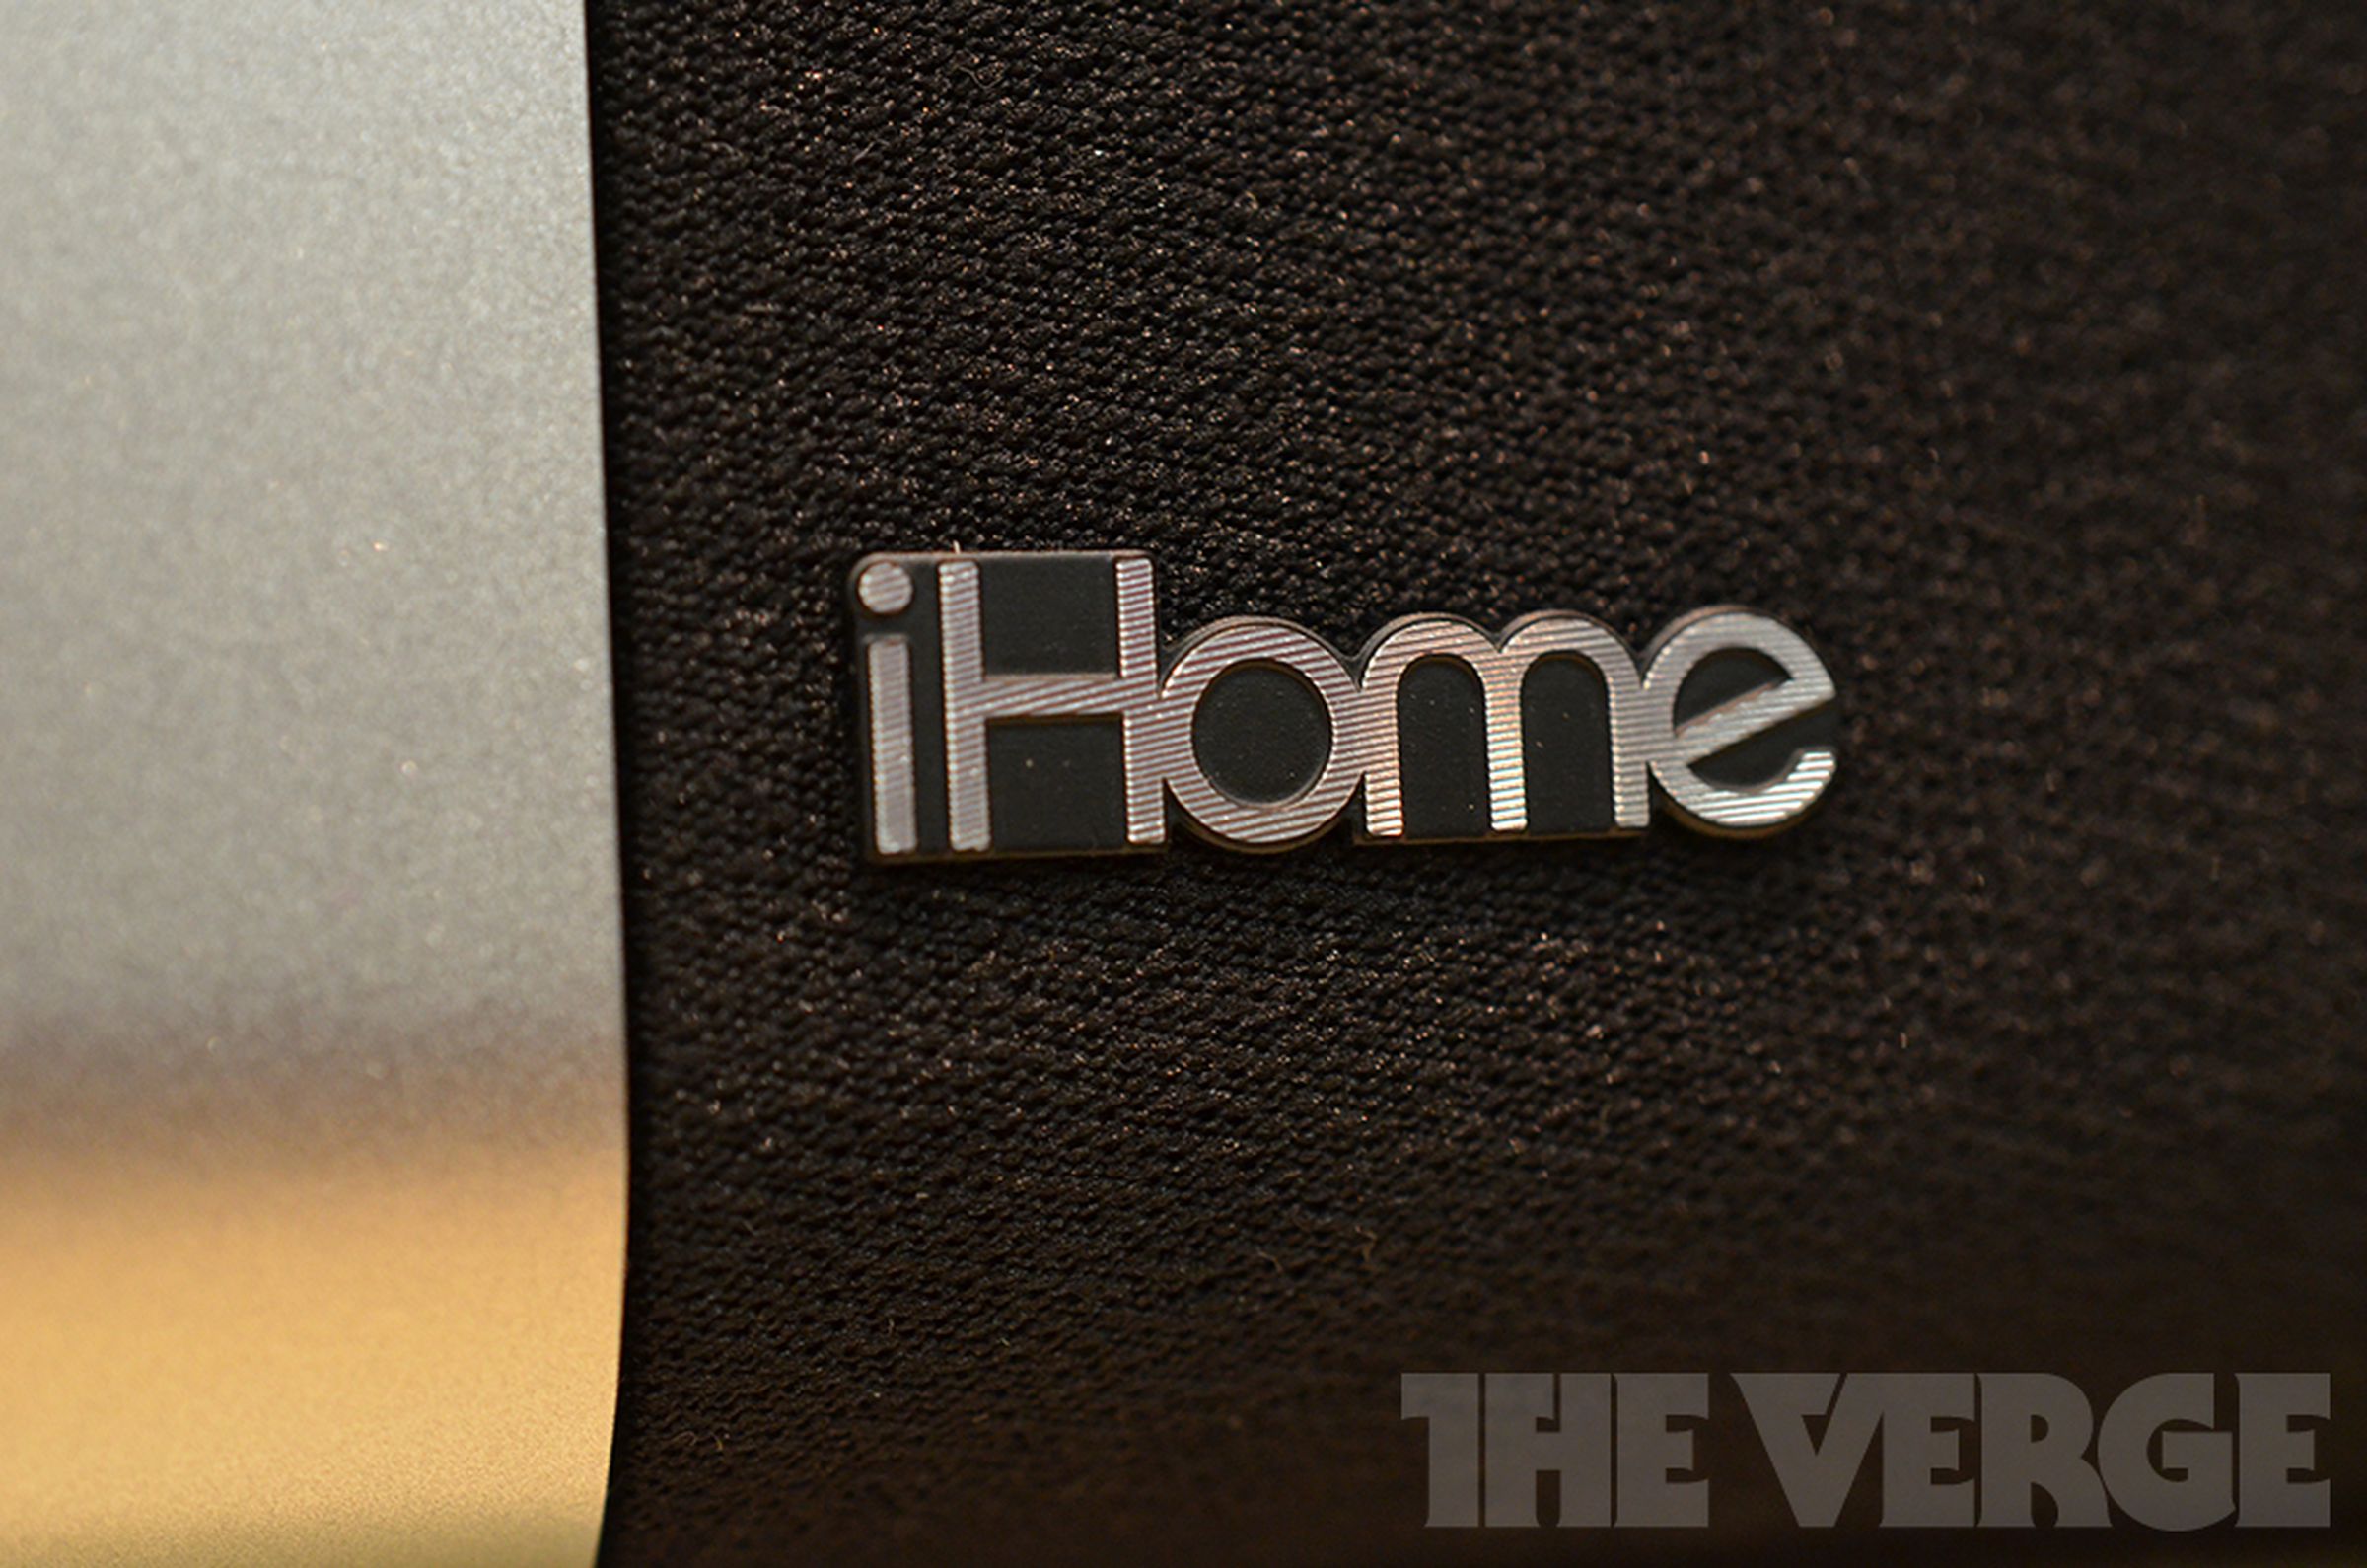 iHome iD50 Bluetooth clock radio for iPhones, iPads, and iPods (hands-on photos)